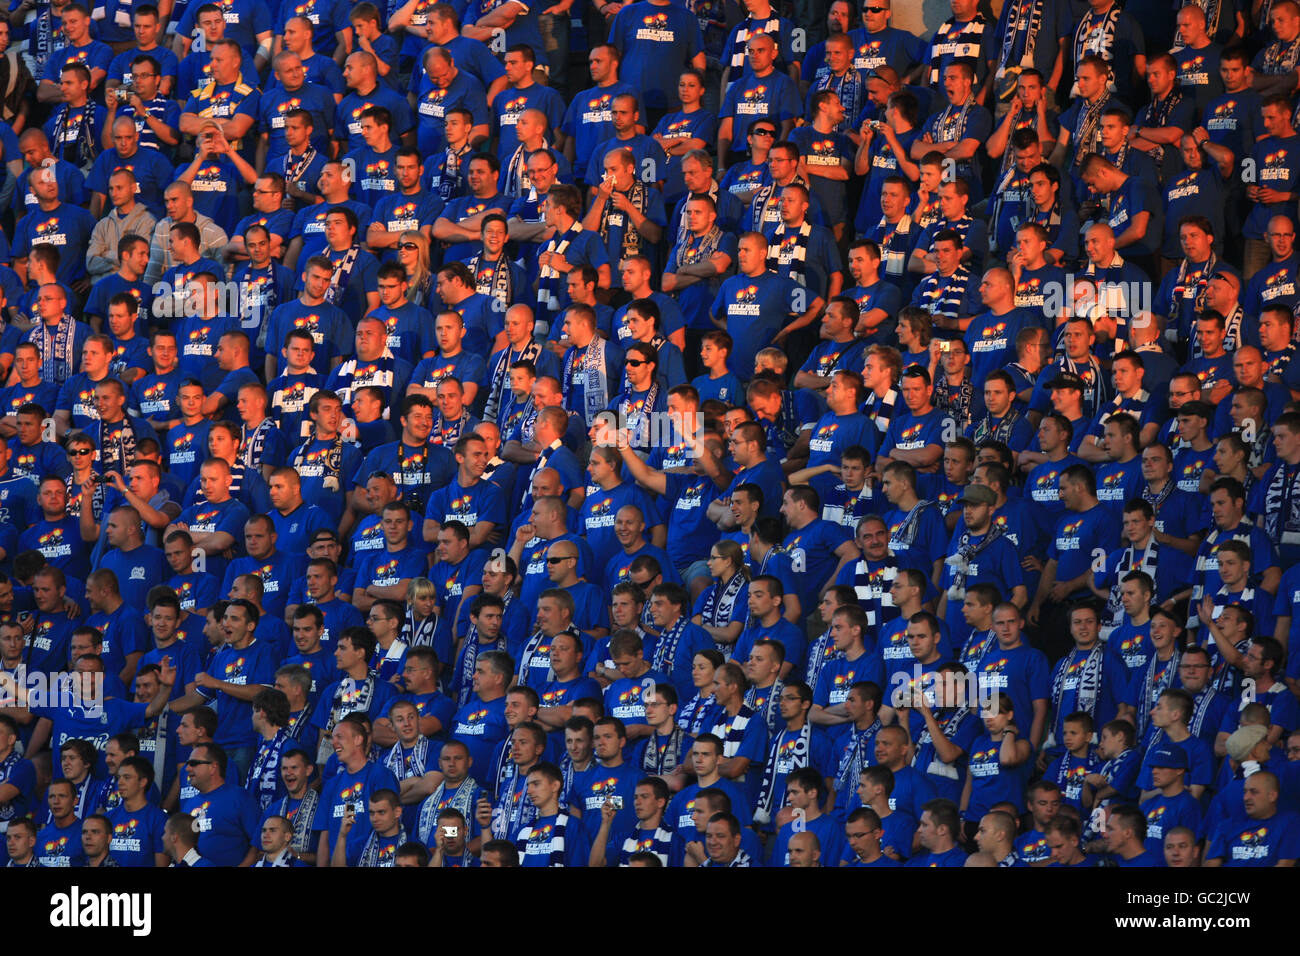 The KKS Lech Poznan Kolejorz fans cheer on their side in the stands Stock Photo